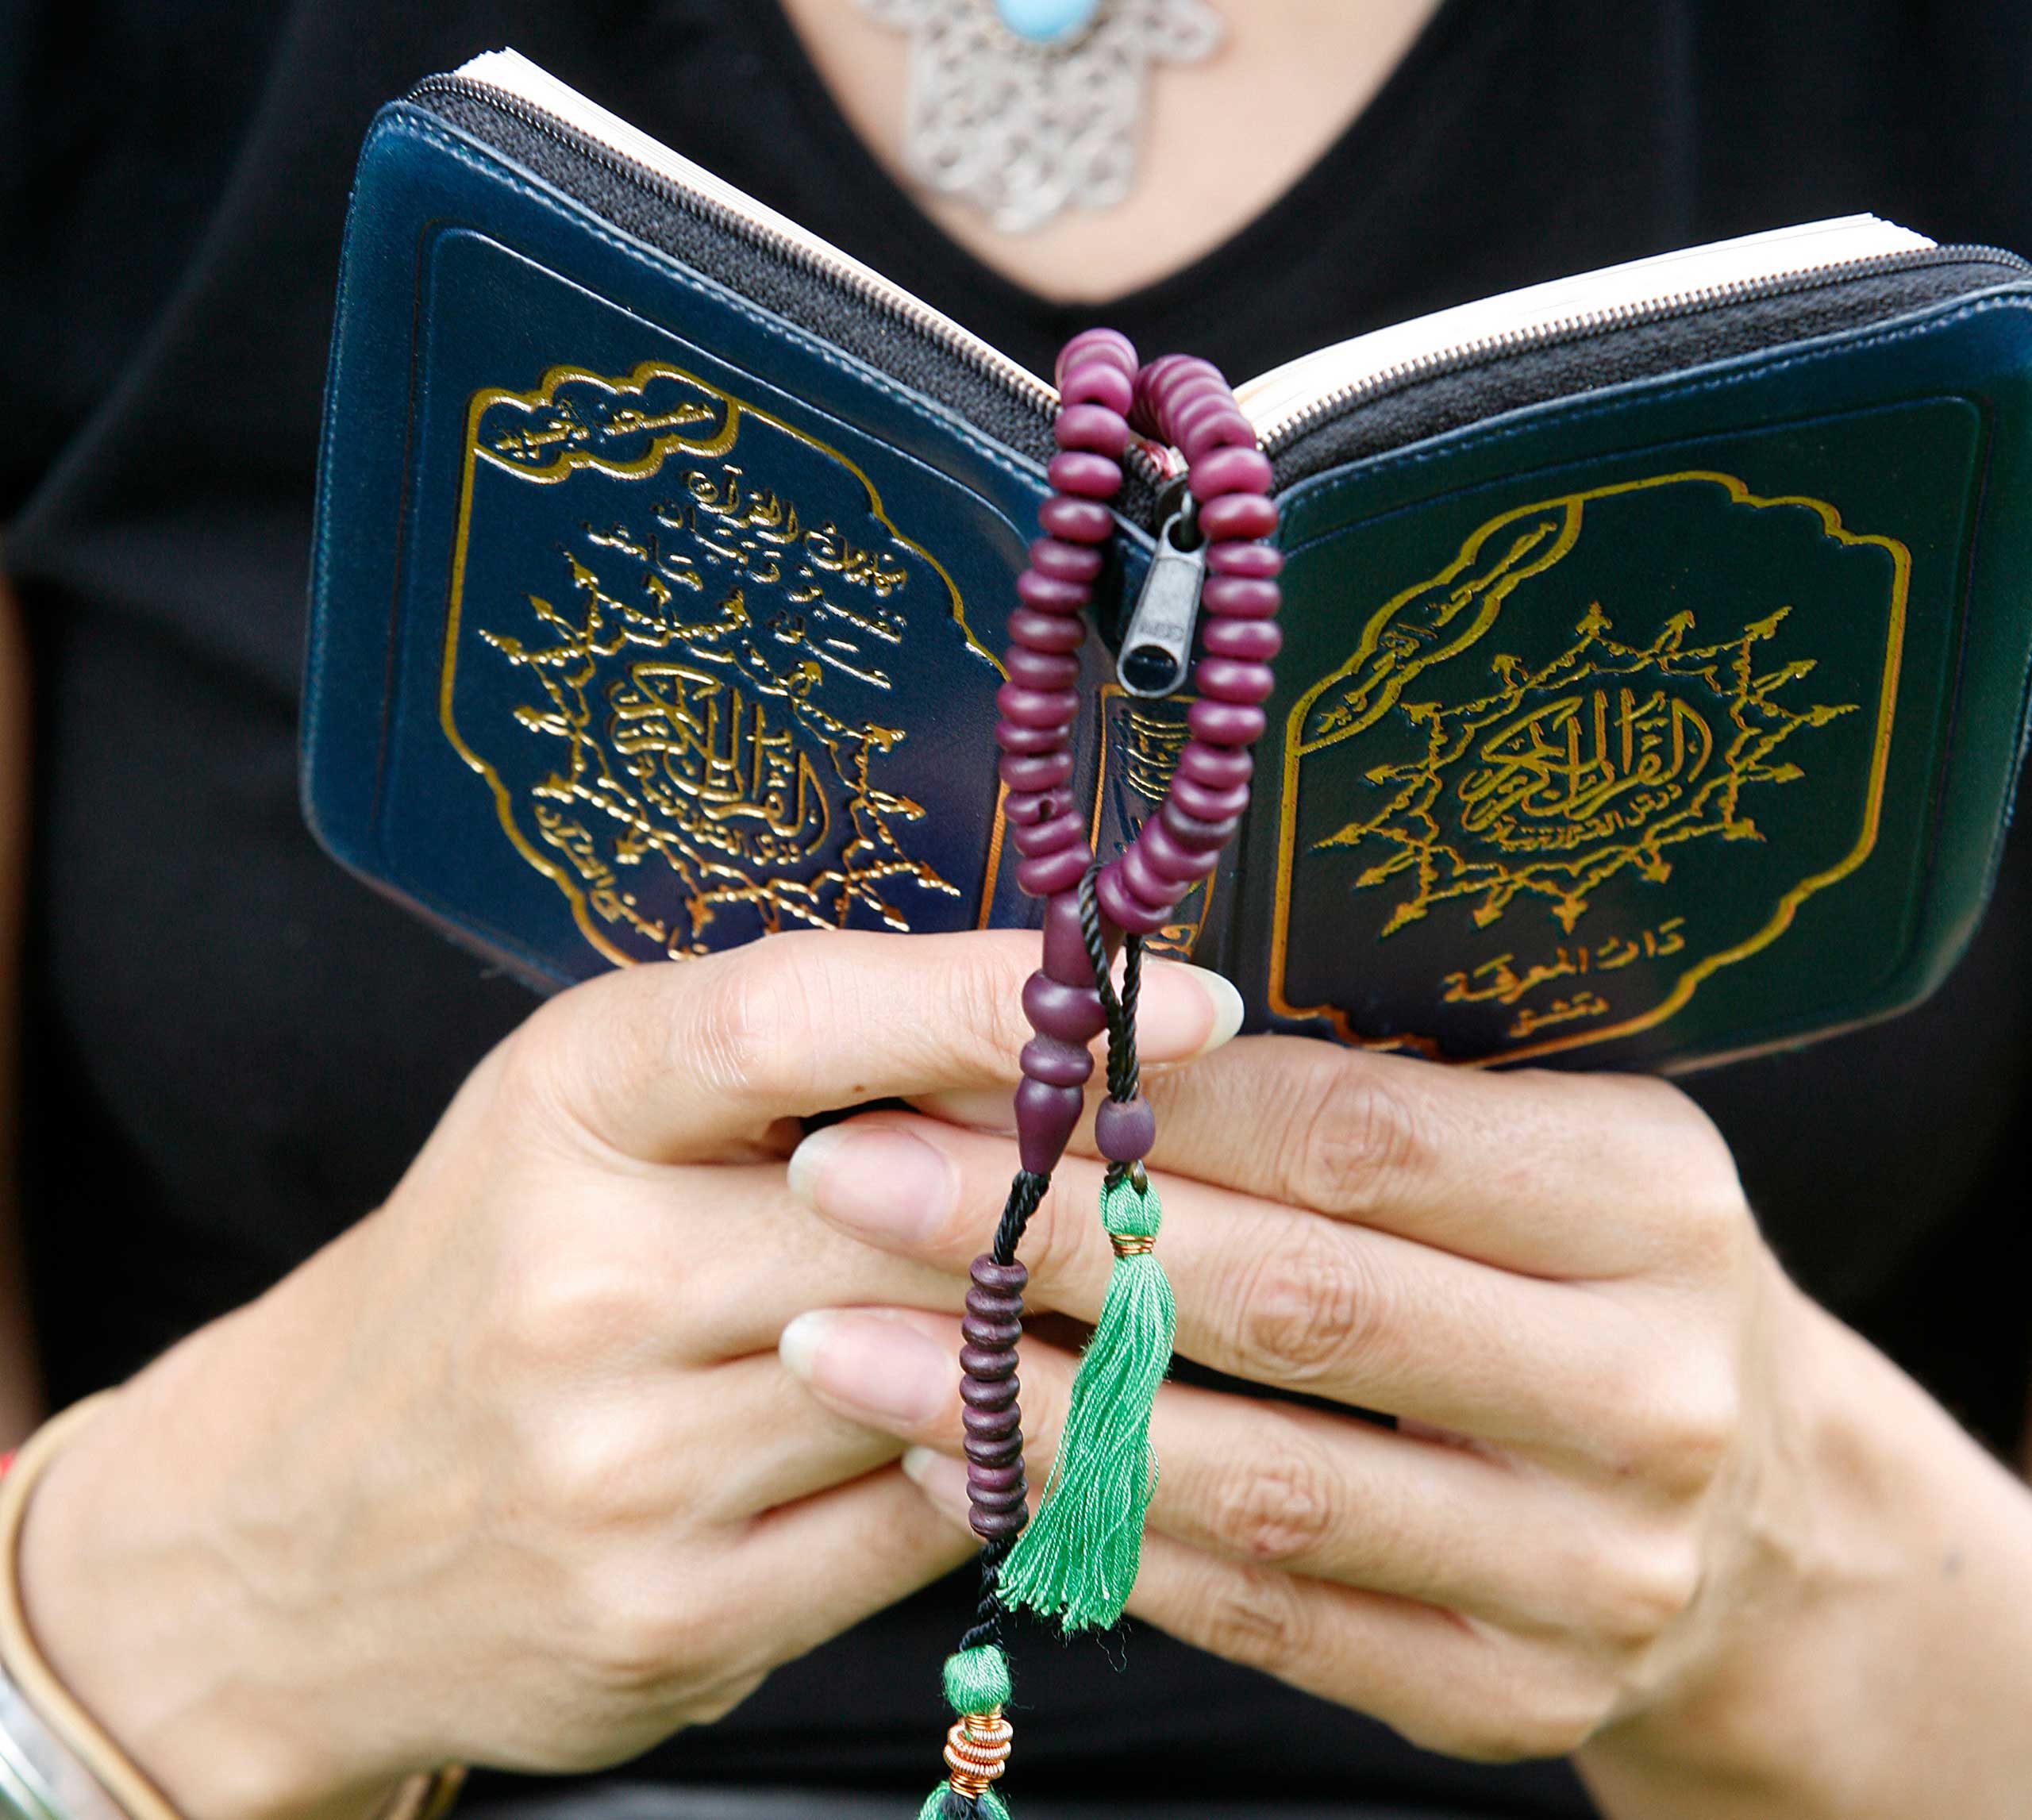 Woman reading the Koran. (Getty Images)